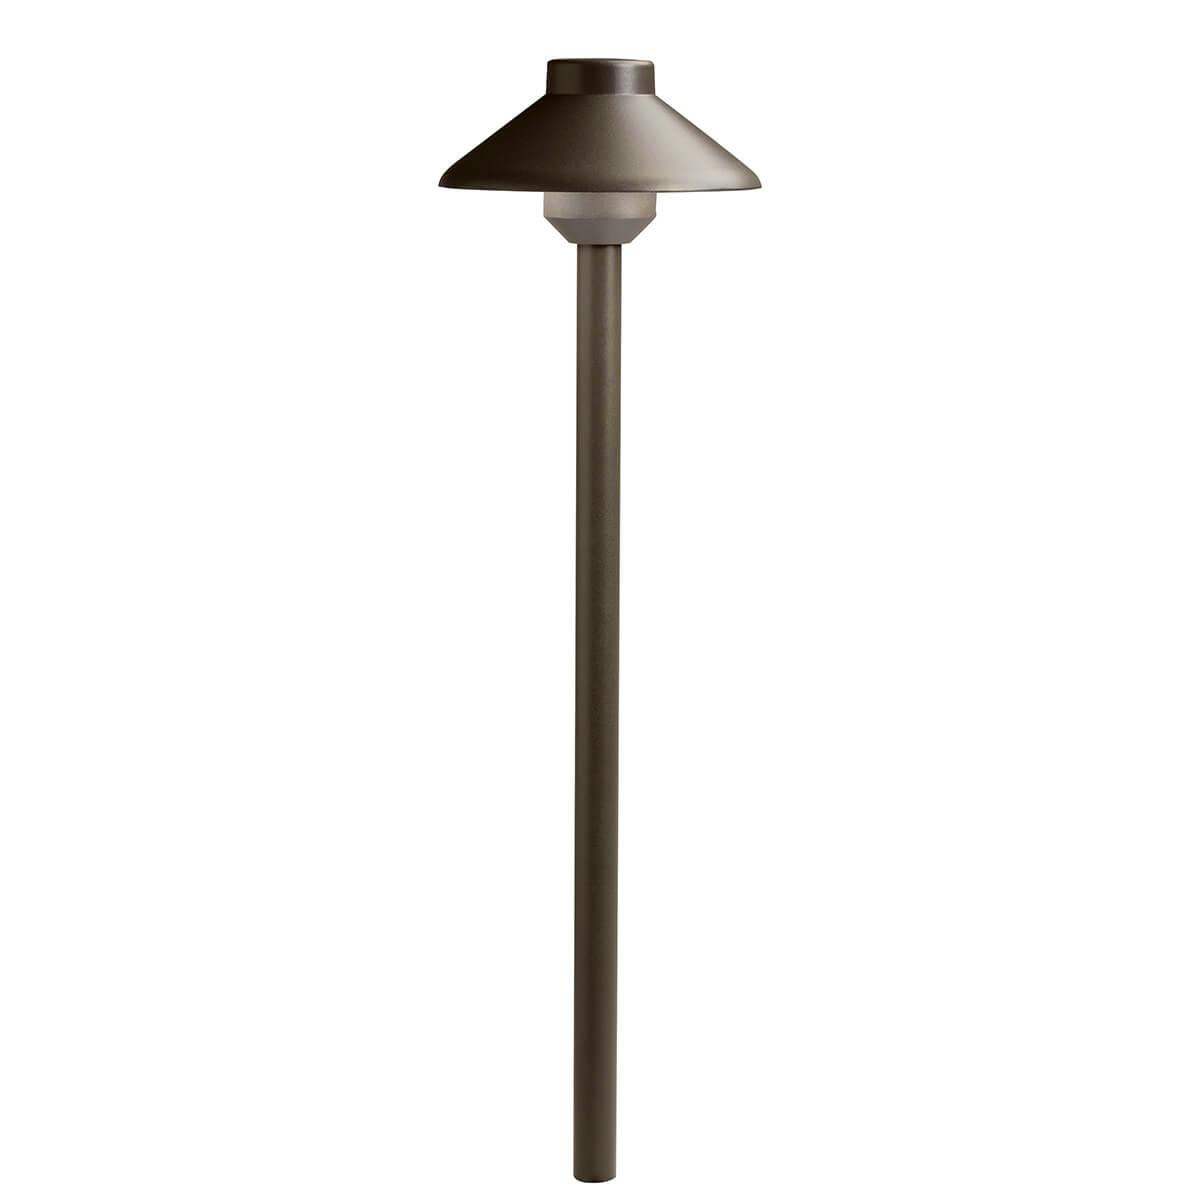 Short Stepped Dome 2700K LED Path Light Textured Architectural Bronze on a white background